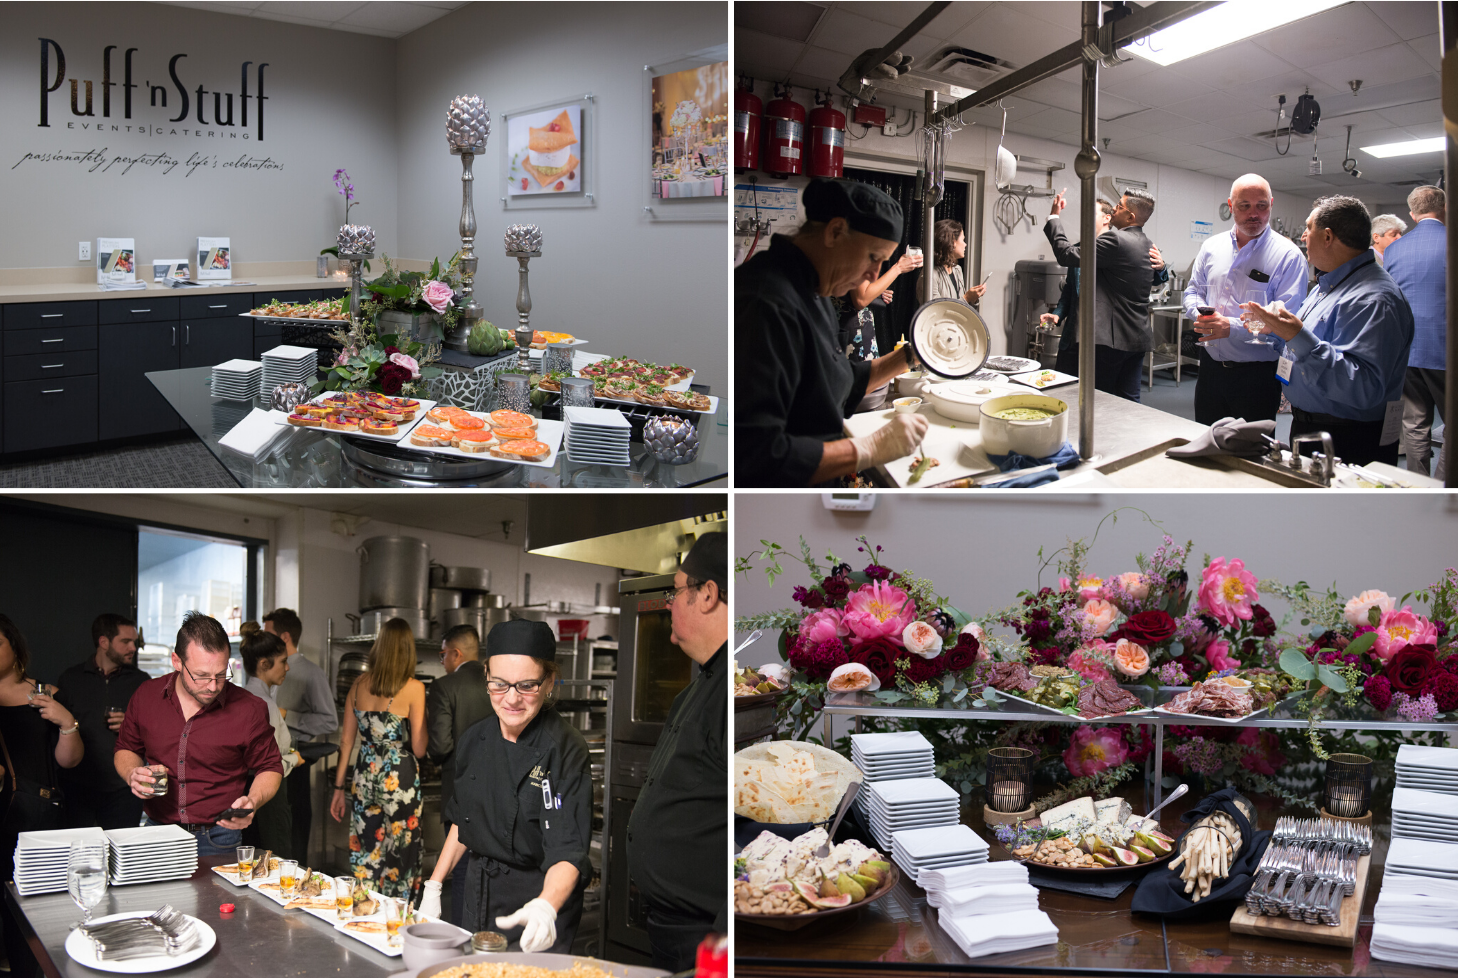 Corporate Events  Leading Caterer's of America at Puff 'n Stuff